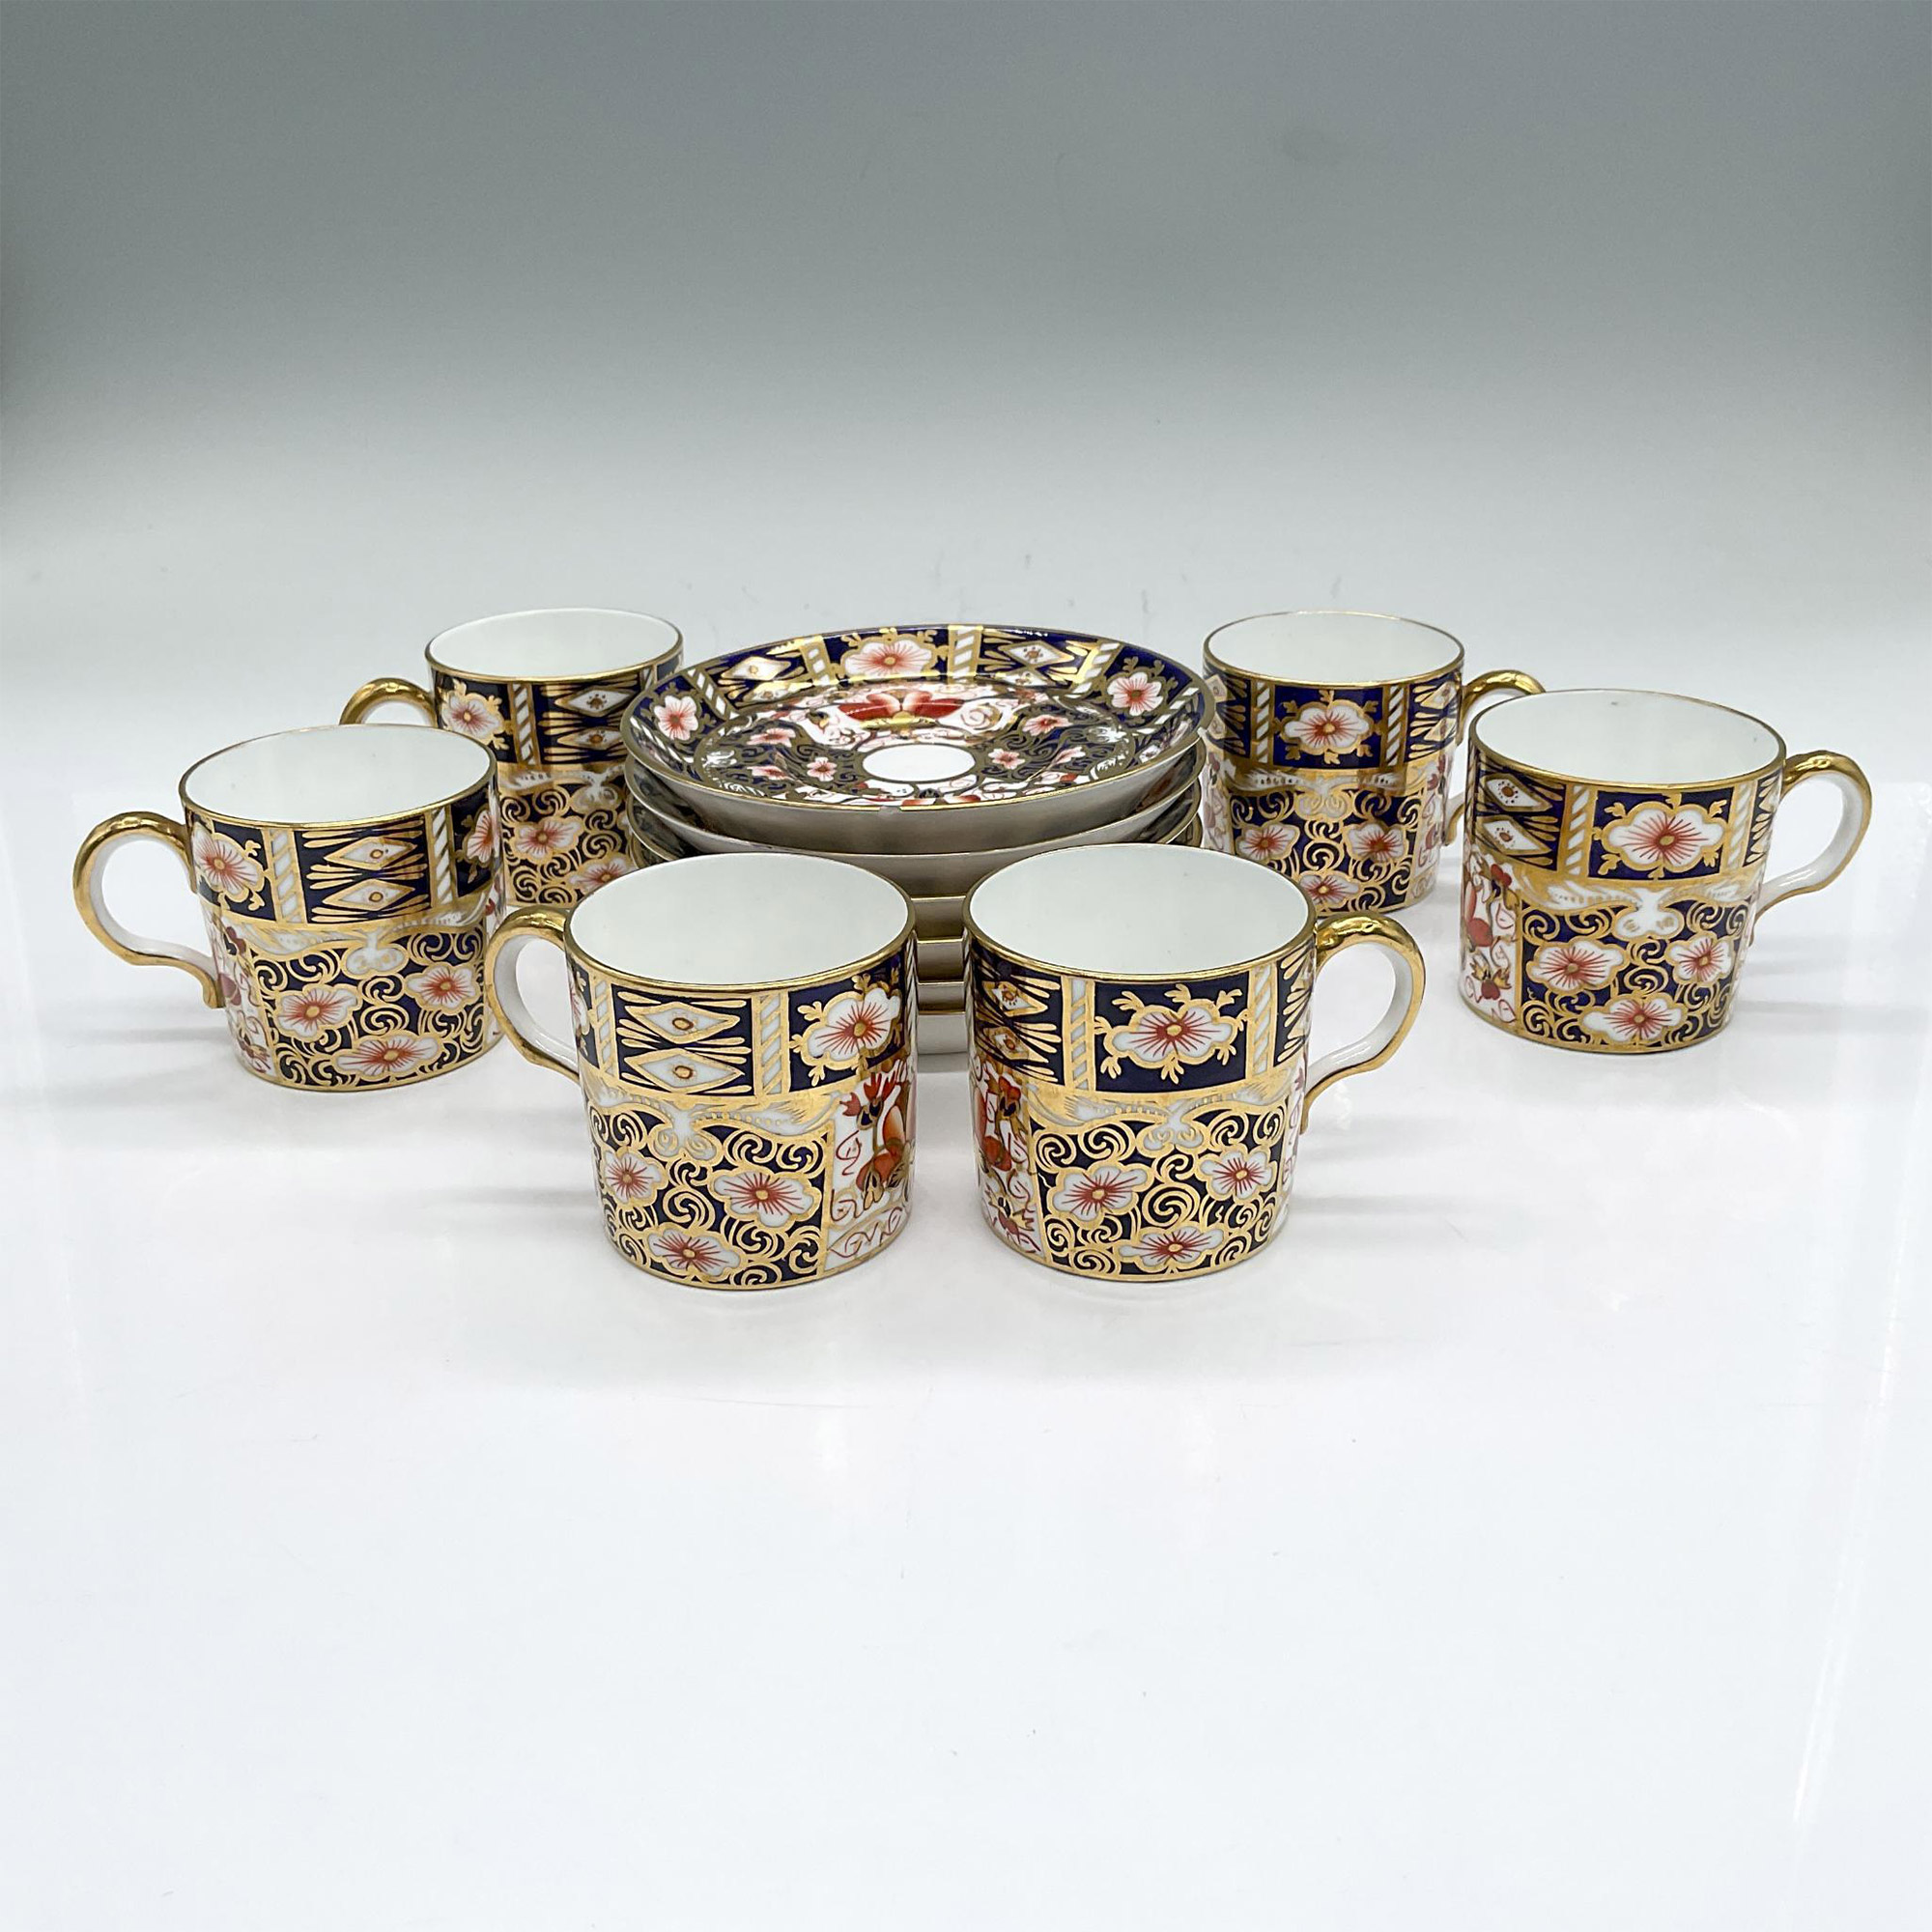 12pc Royal Crown Derby Demitasse Cups and Saucers - Image 2 of 7